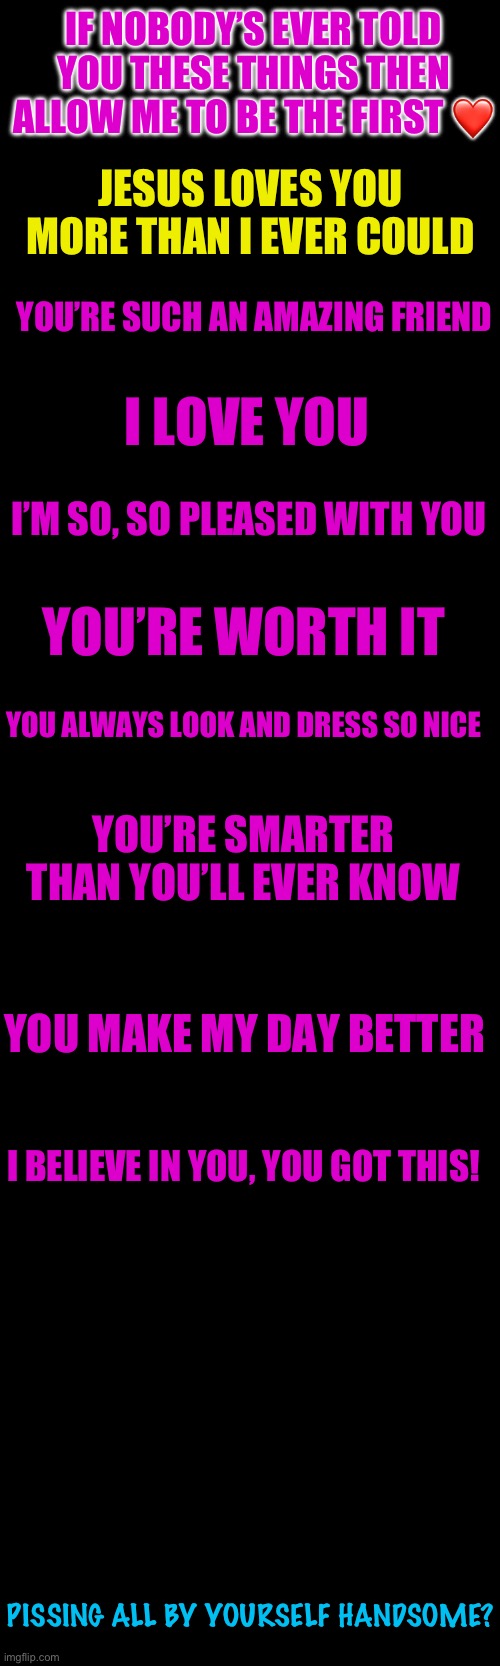 I truly do know you’re amazing, and wish only the best for you | IF NOBODY’S EVER TOLD YOU THESE THINGS THEN ALLOW ME TO BE THE FIRST ❤️; JESUS LOVES YOU MORE THAN I EVER COULD; YOU’RE SUCH AN AMAZING FRIEND; I LOVE YOU; I’M SO, SO PLEASED WITH YOU; YOU’RE WORTH IT; YOU ALWAYS LOOK AND DRESS SO NICE; YOU’RE SMARTER THAN YOU’LL EVER KNOW; YOU MAKE MY DAY BETTER; I BELIEVE IN YOU, YOU GOT THIS! PISSING ALL BY YOURSELF HANDSOME? | image tagged in wholesome | made w/ Imgflip meme maker